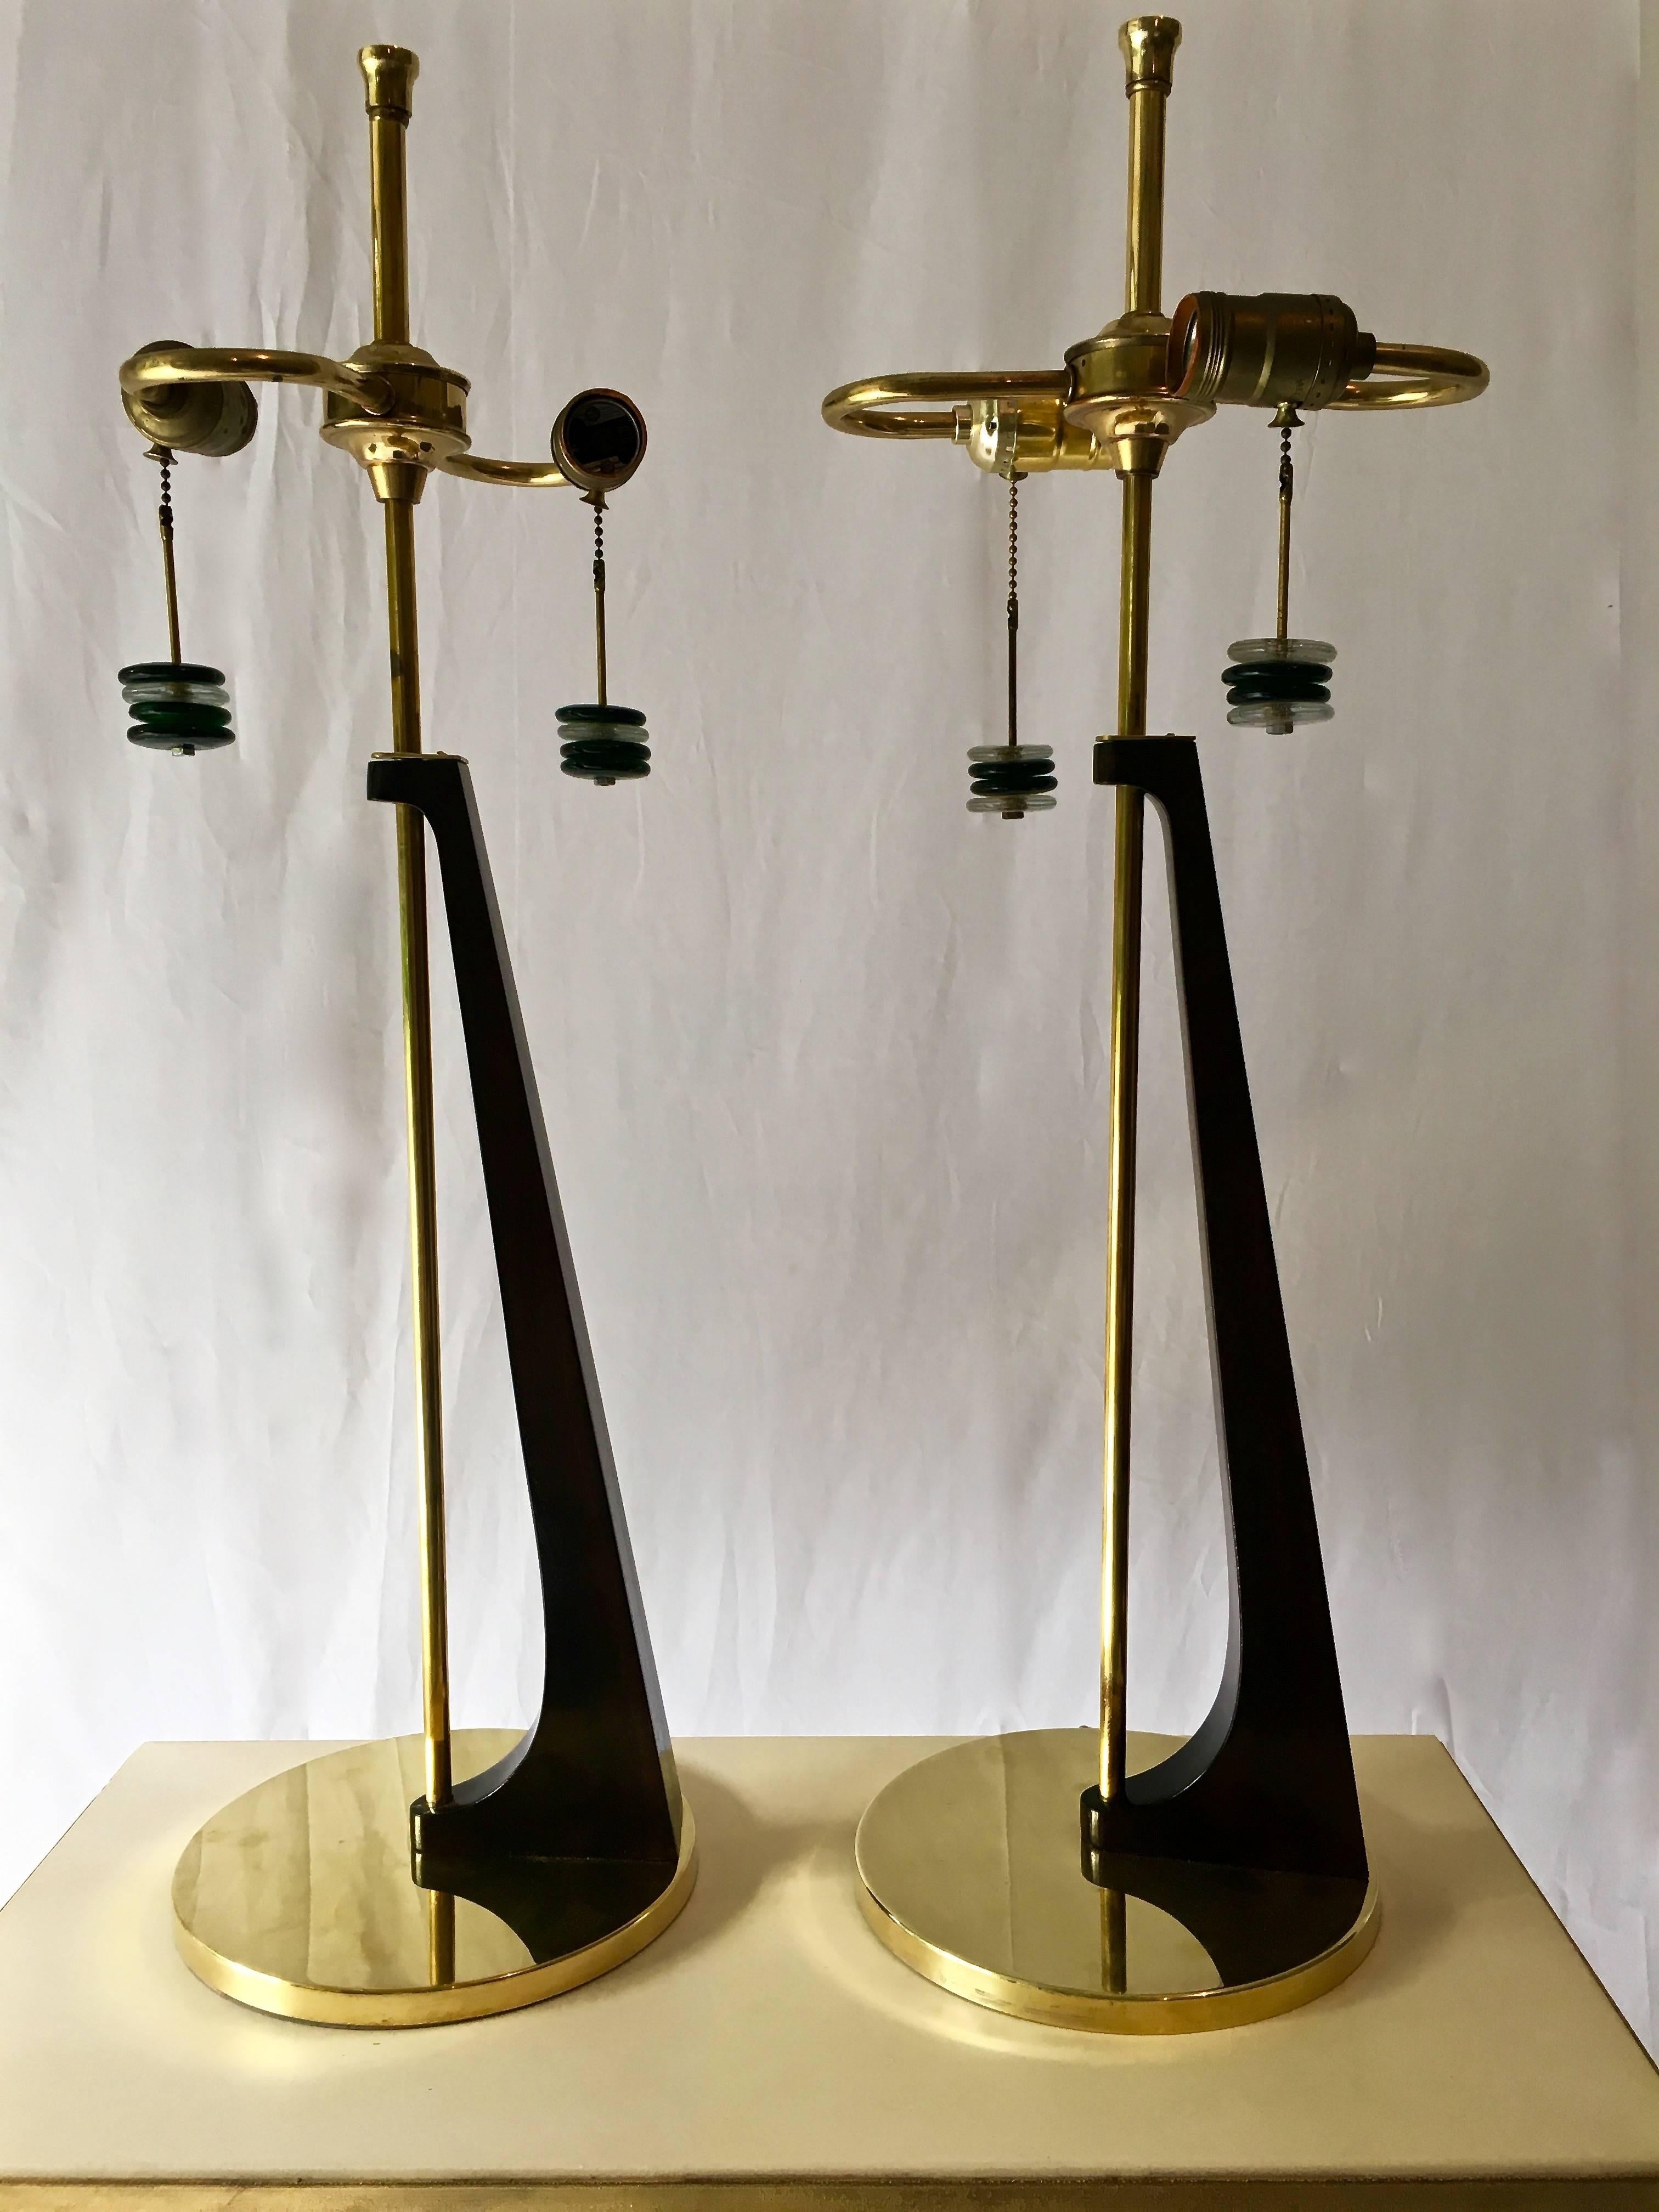 Modernist Table Lamps in Architectural Form refinished walnut body in deep chocolate brown stain, and un-lacquered brass bases and rods, newly polished. Ornamental pull chains, decorated with bakelite disks that dangle (and are removable). Original